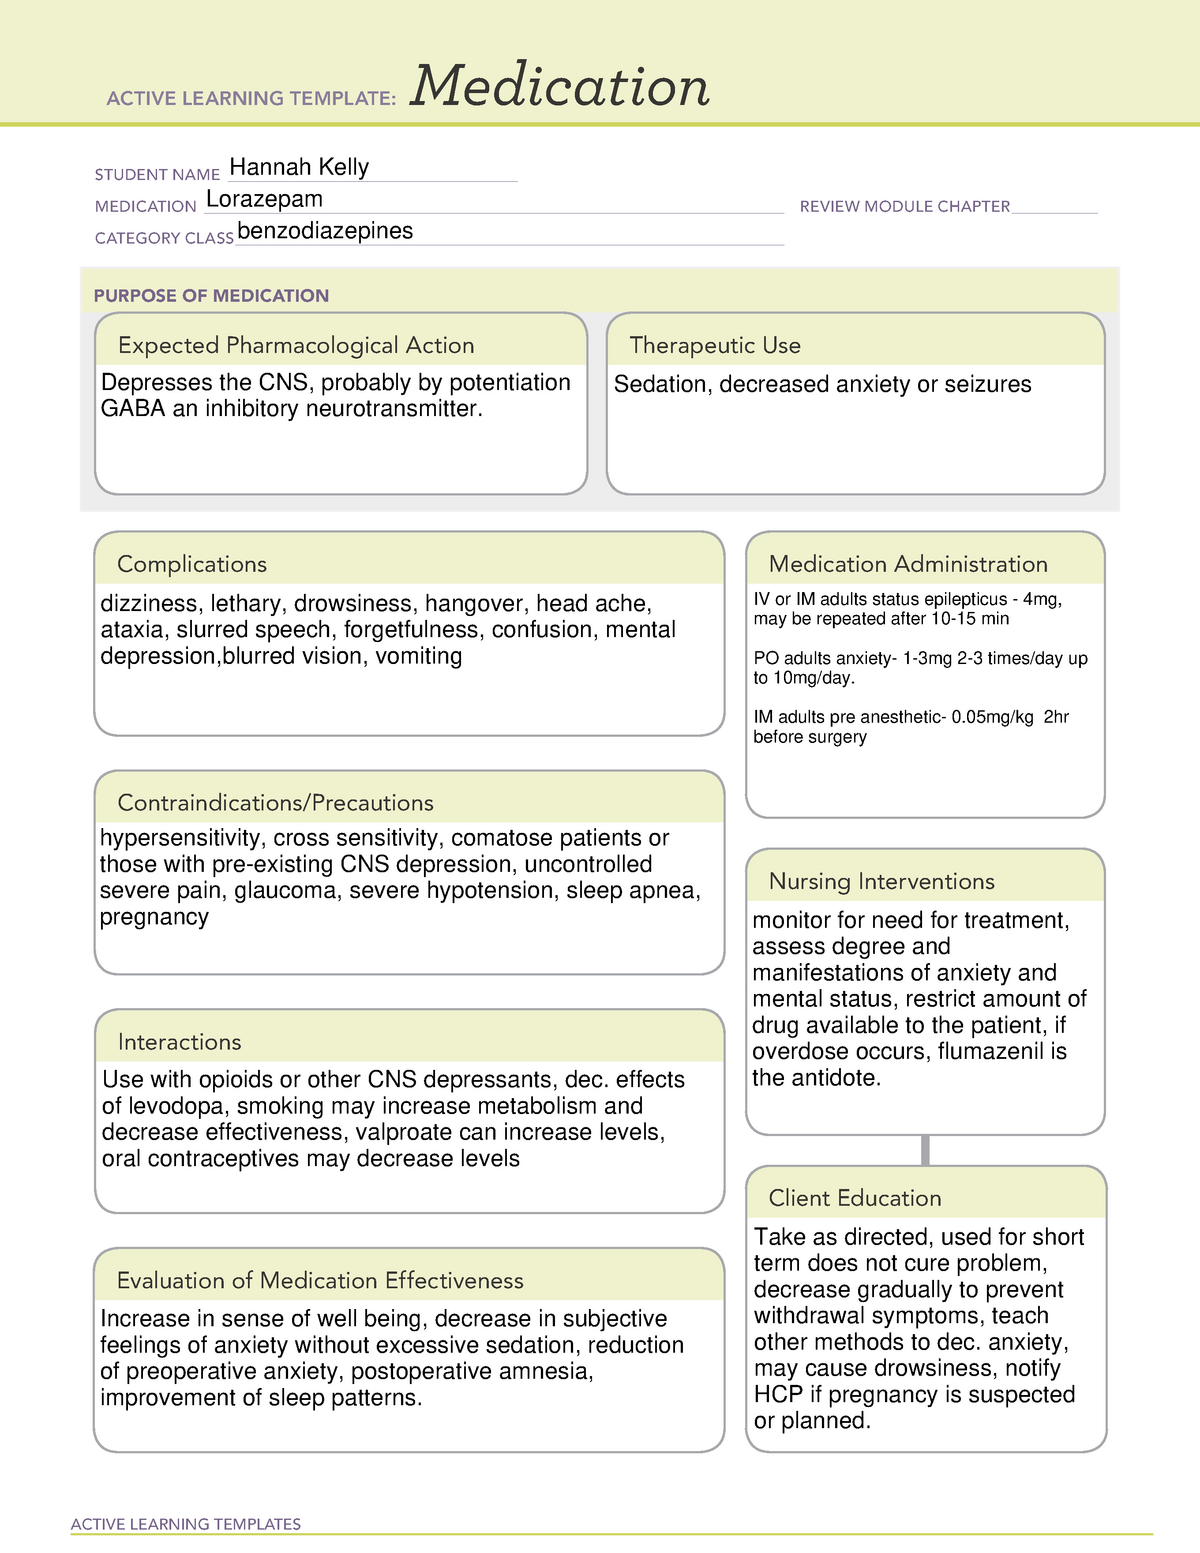 ATI Template Medication Lorazepam ACTIVE LEARNING TEMPLATES